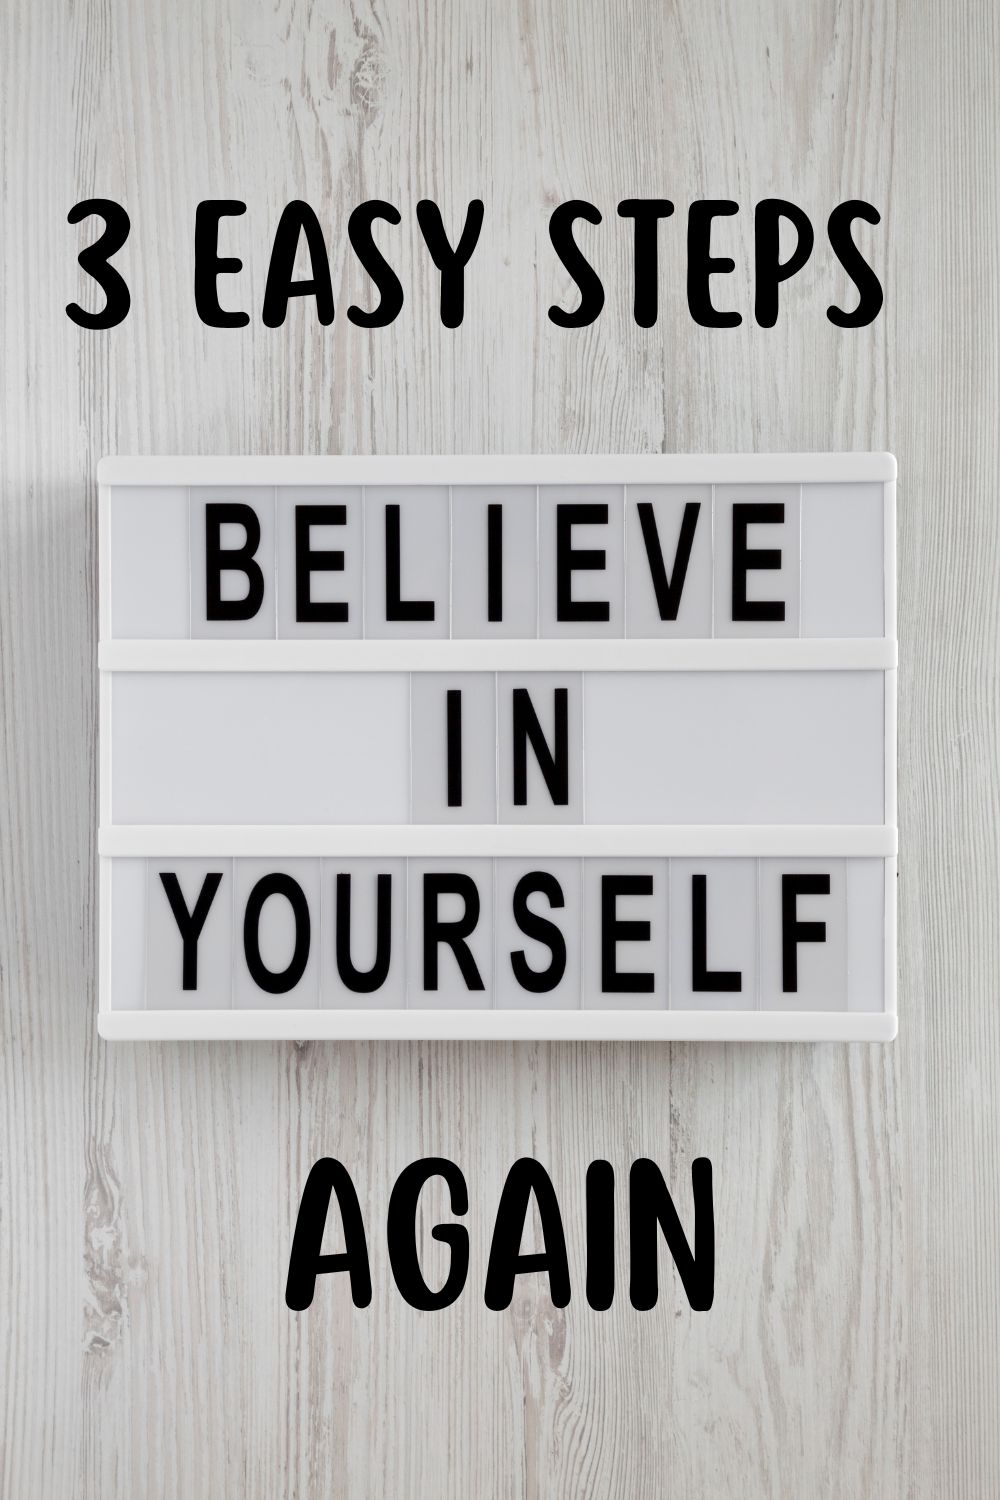 3 easy steps to believe in yourself again.